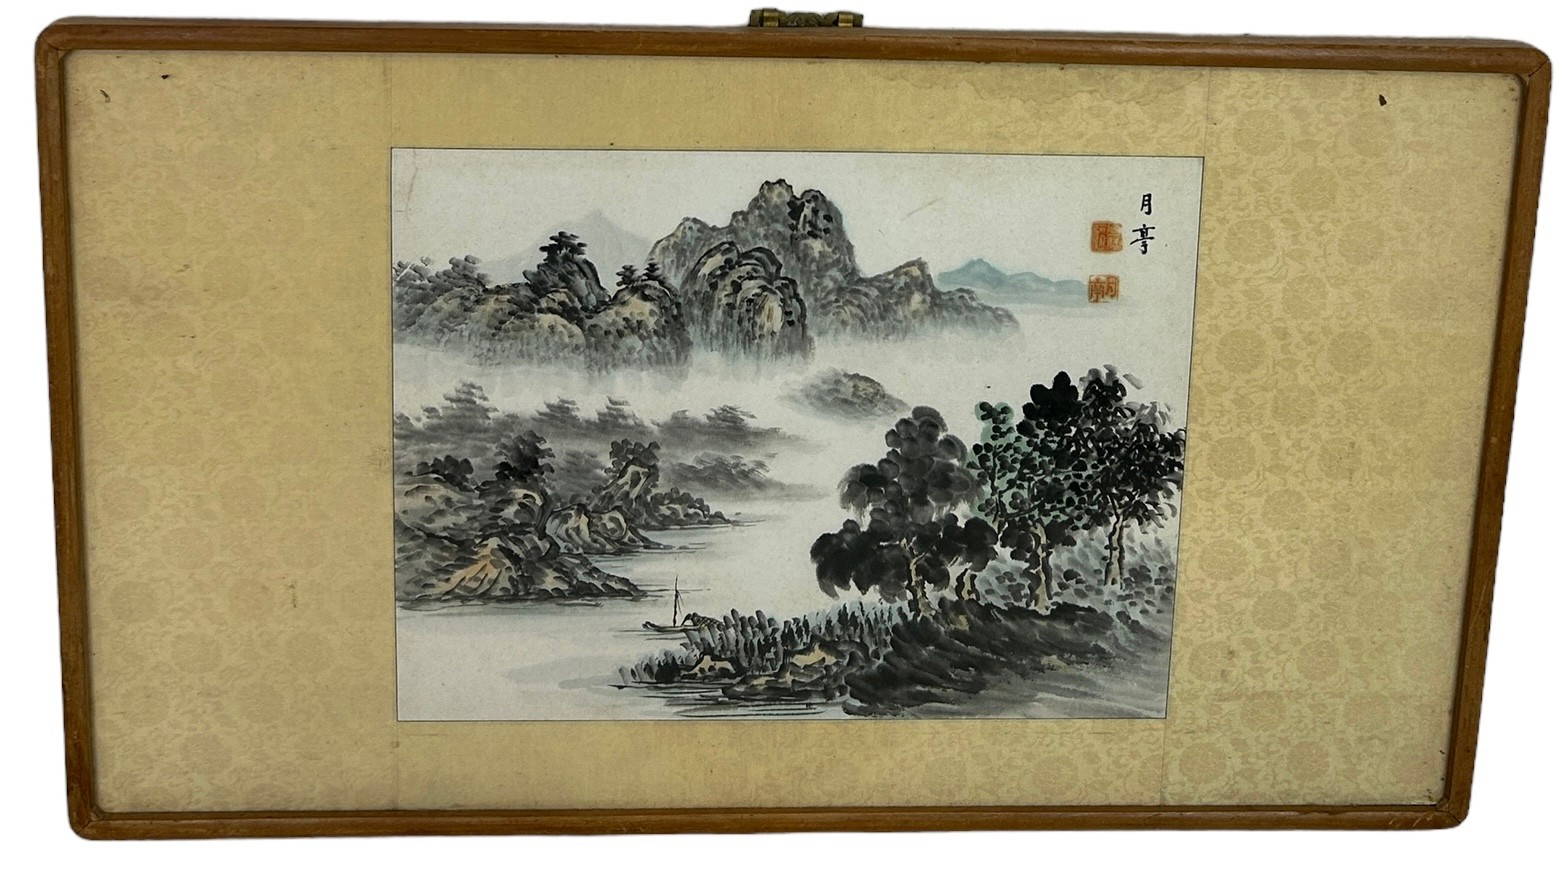 A CHINESE WATERCOLOUR ON PAPER REPUBLIC PERIOD, SILK MOUNTED WITH WOODEN FRAME, First name Yue